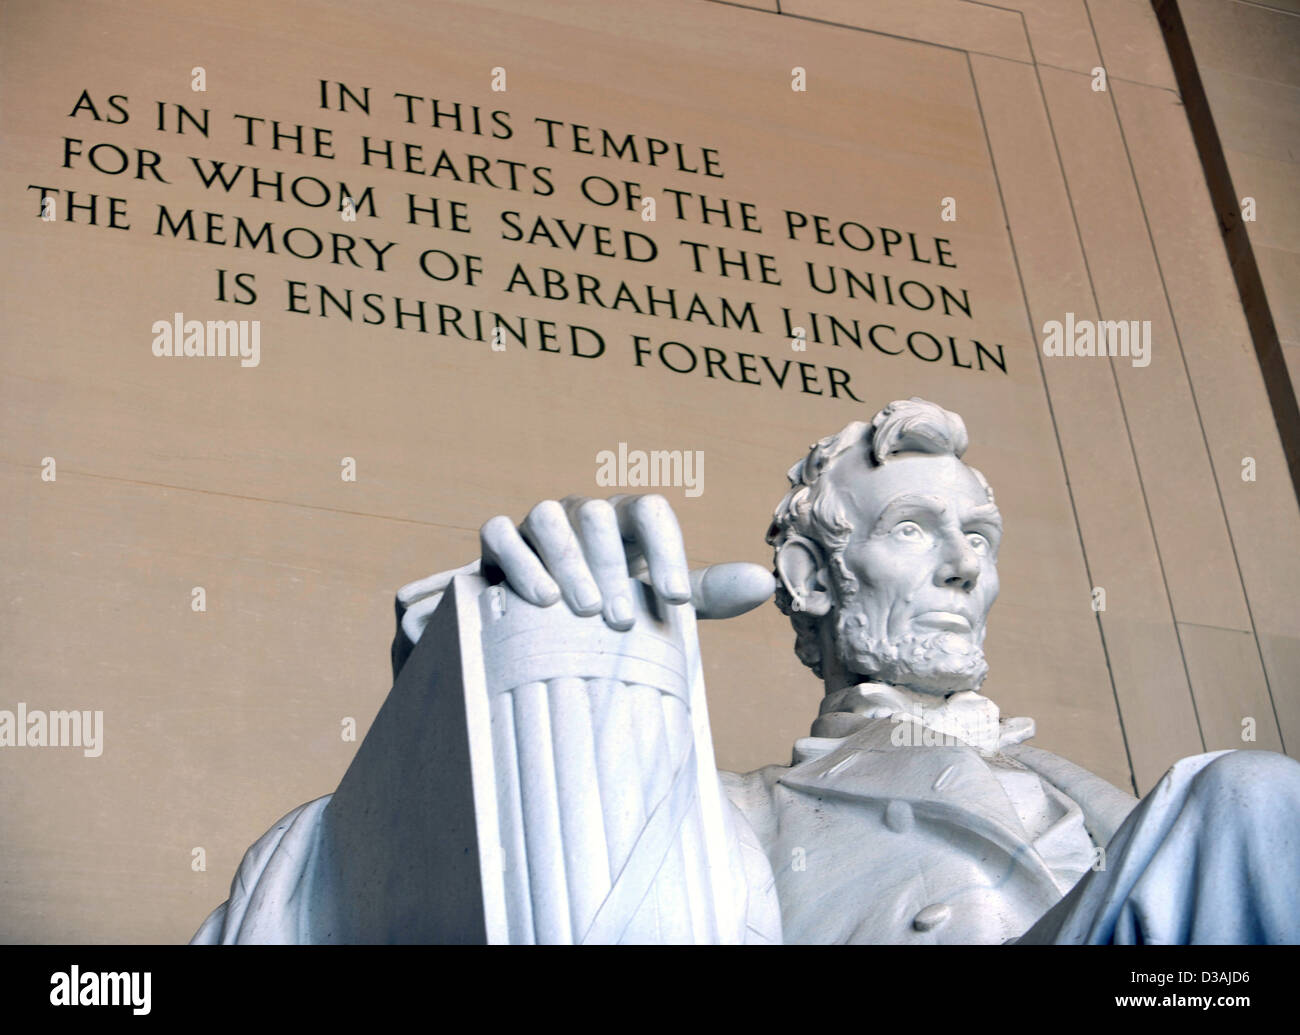 Abraham Lincoln 16th President of the United States of America, Lincoln Memorial, Gettysburg Address, Union ending slavery, USA Stock Photo